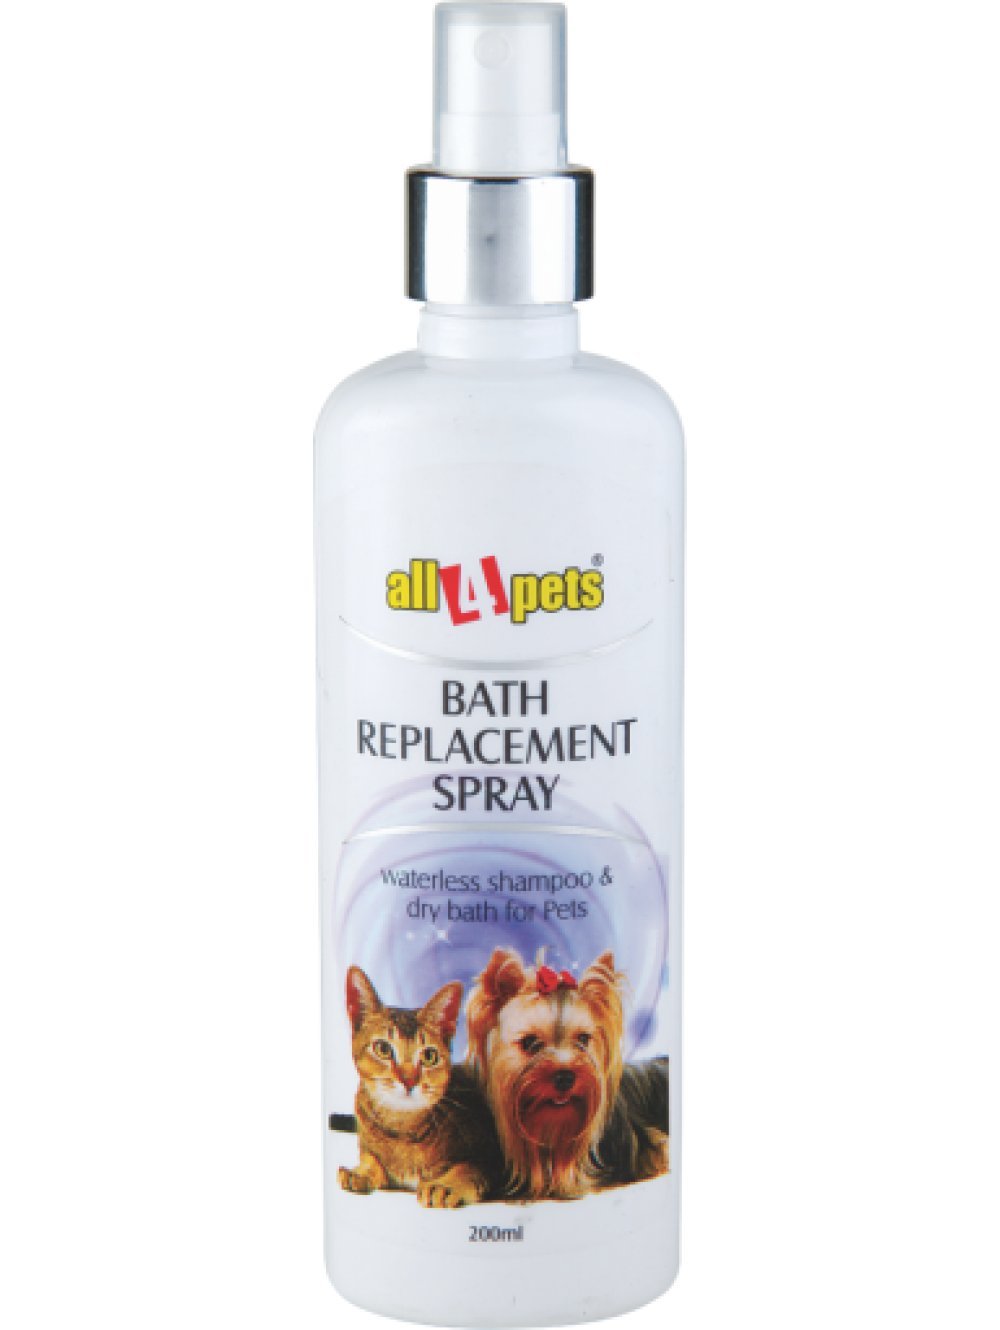 All4Pets Bath Replacement Spray - pets food